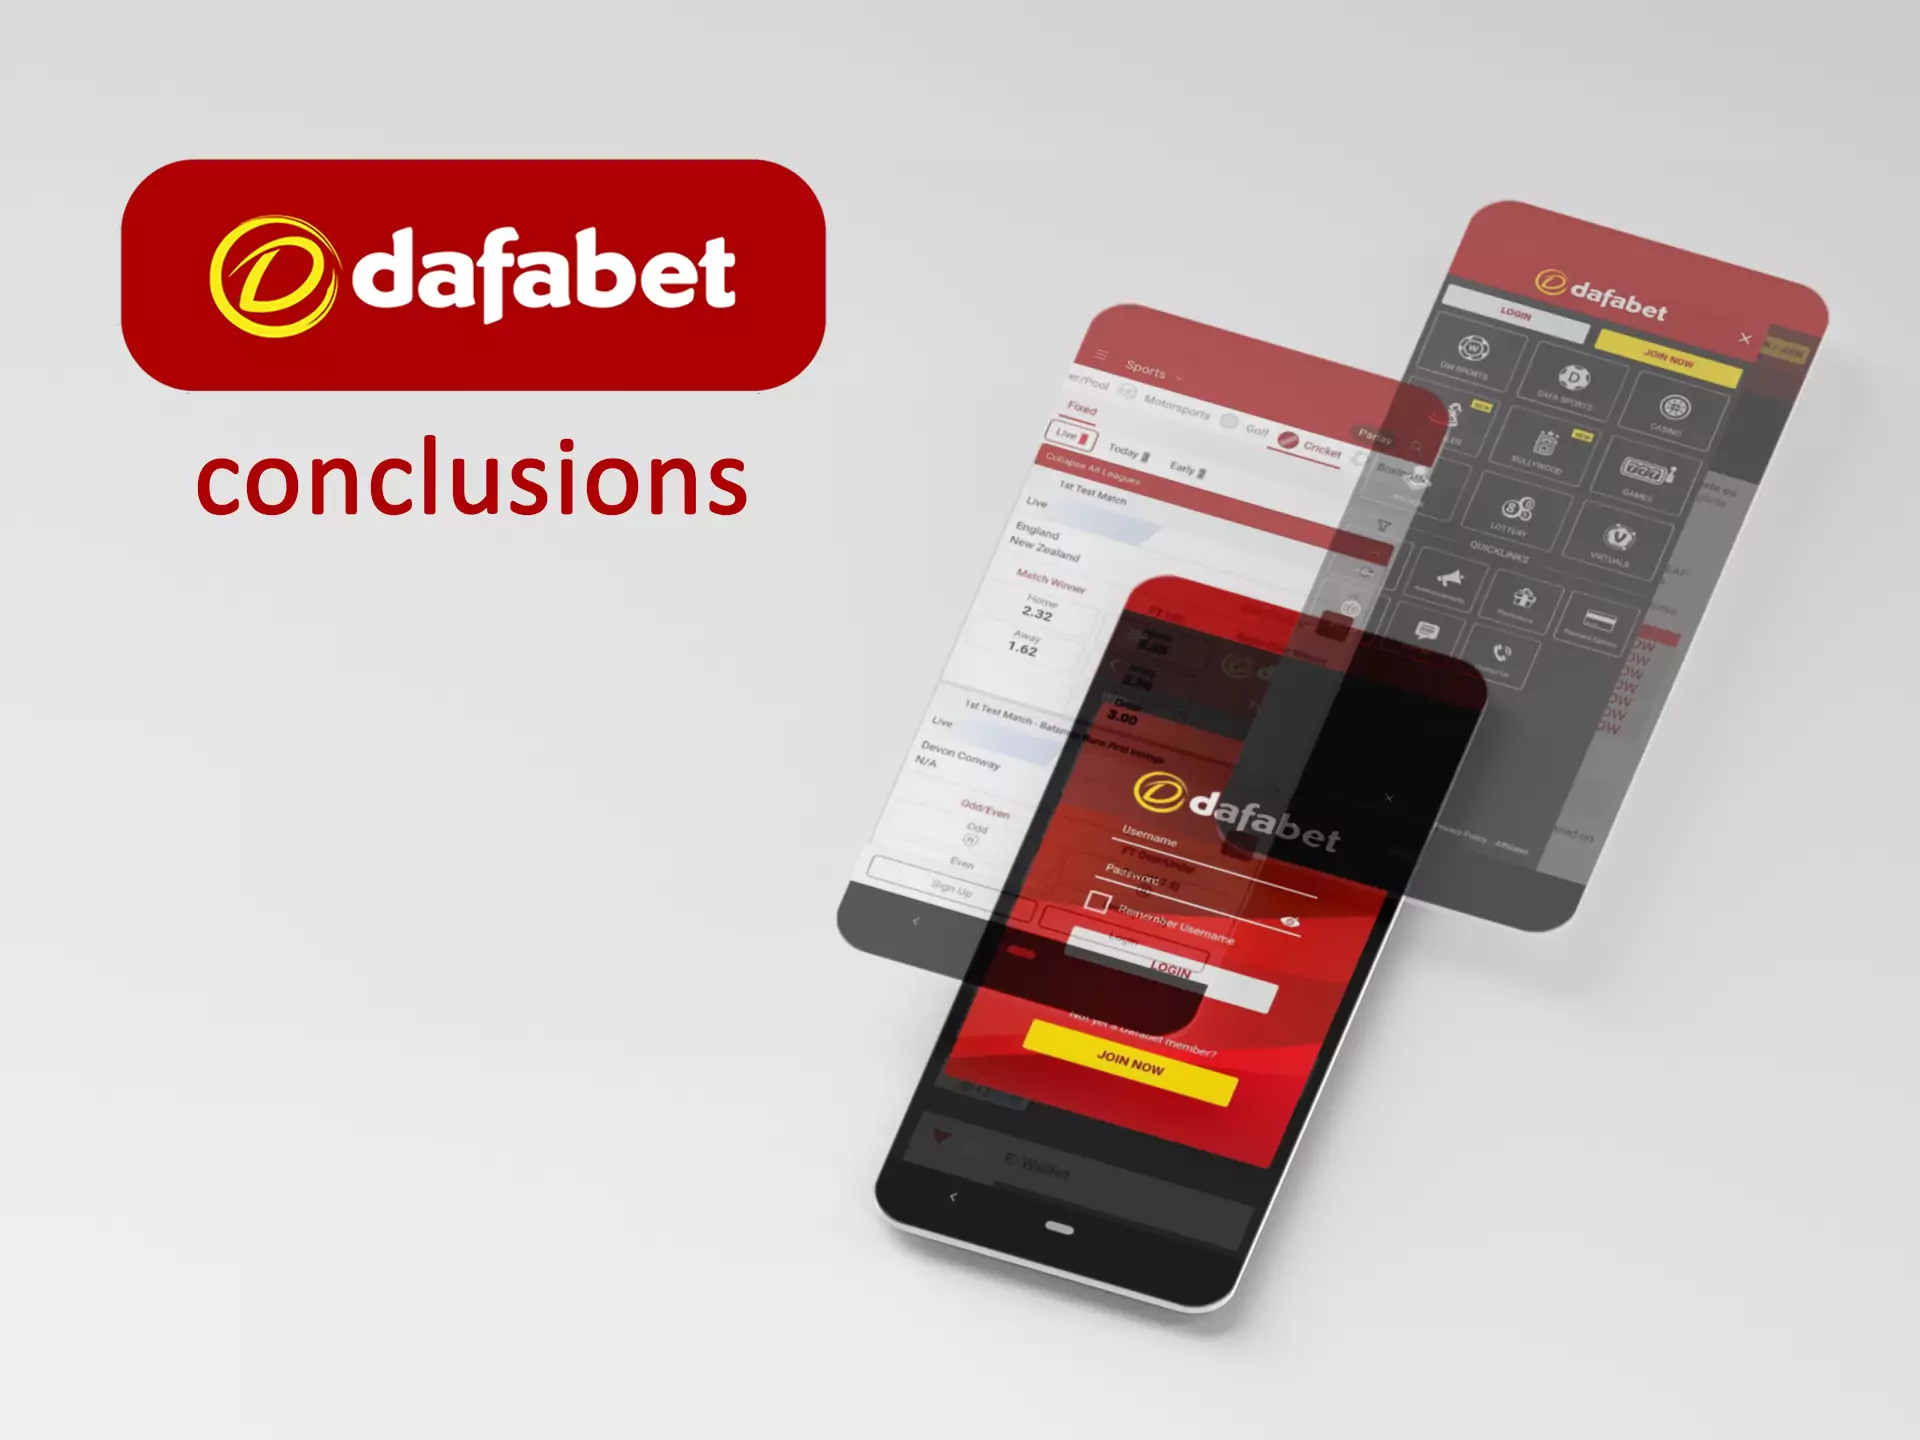 Our experts have analyzed the Dafabet app in detail and made conclusions about it.